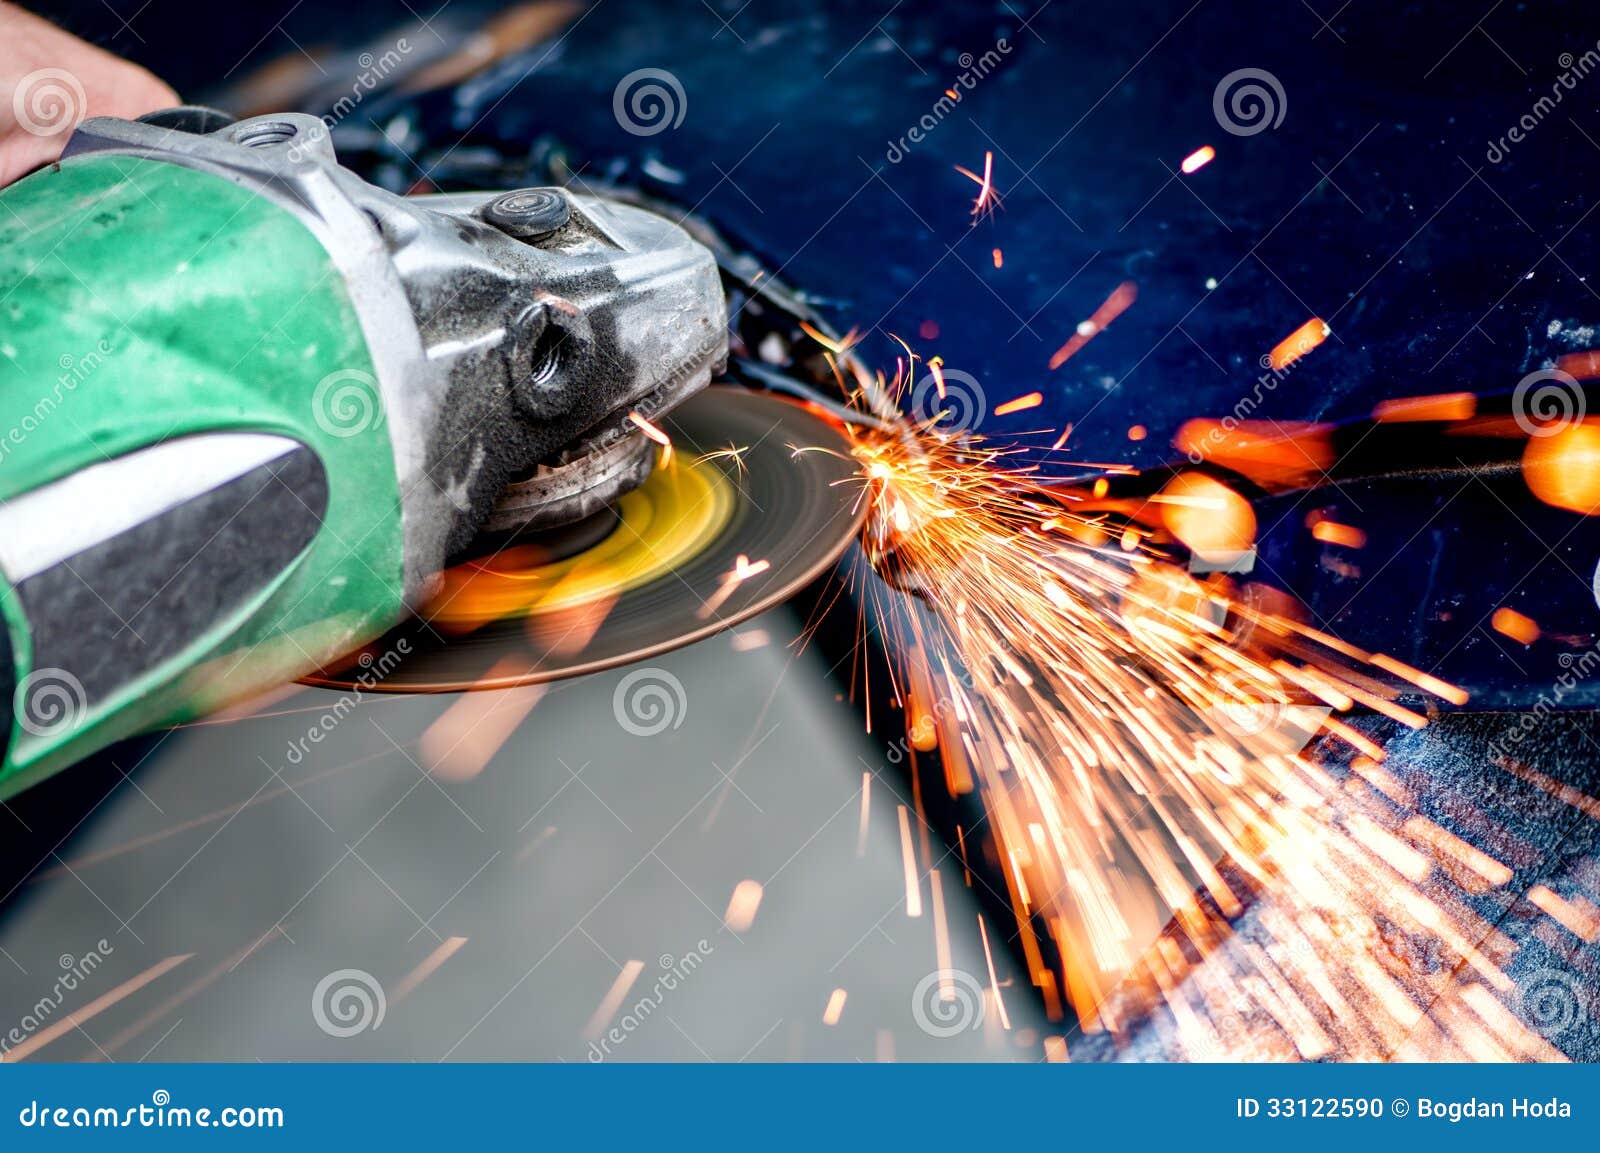 heavy industry worker cutting steel with angle grinder